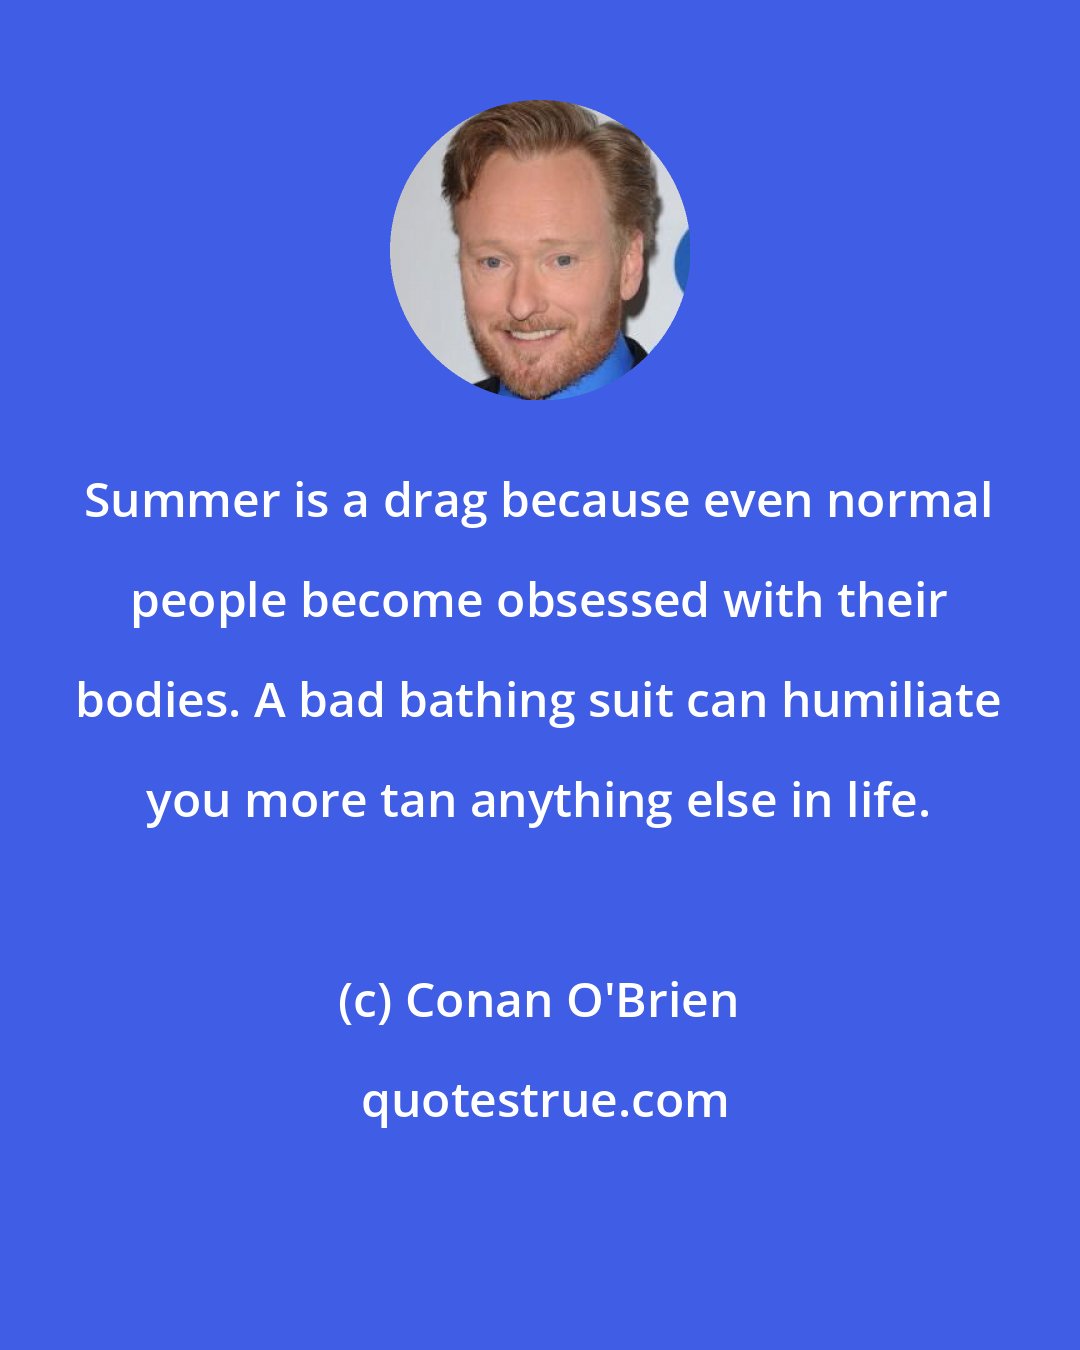 Conan O'Brien: Summer is a drag because even normal people become obsessed with their bodies. A bad bathing suit can humiliate you more tan anything else in life.